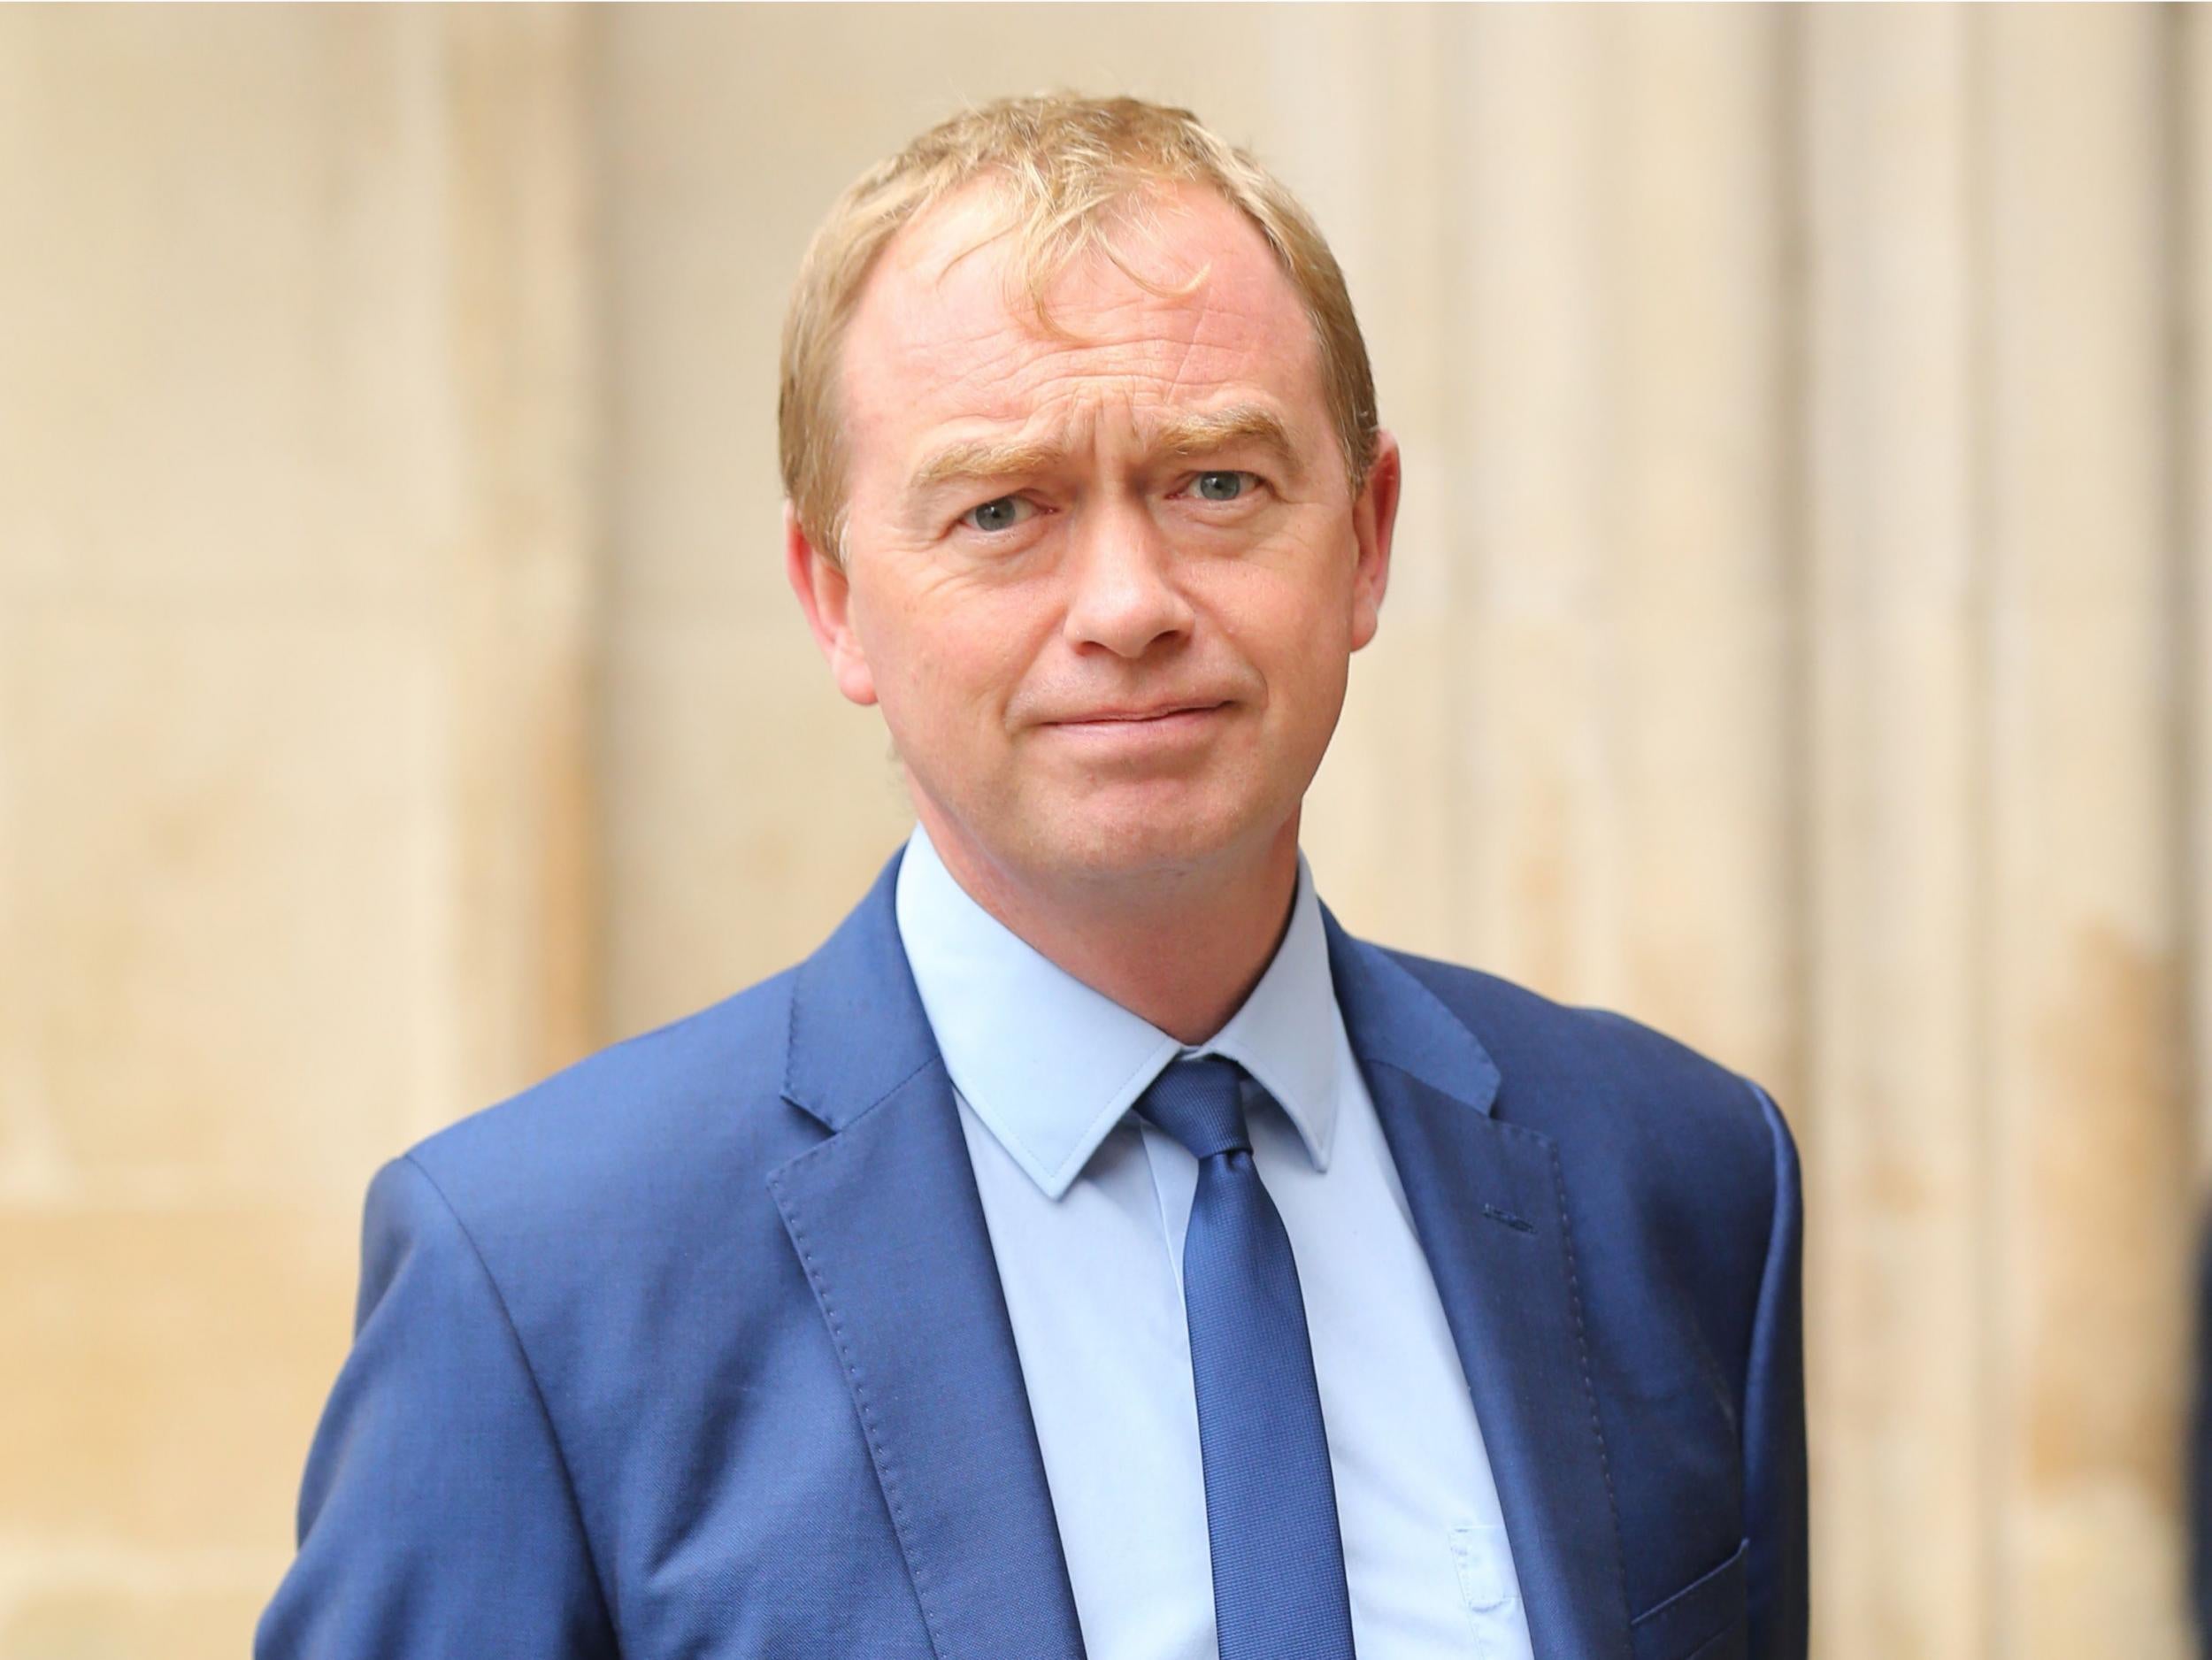 Farron called conversion therapy abhorrent, saying he will vote to ban it when the legislation comes to parliament